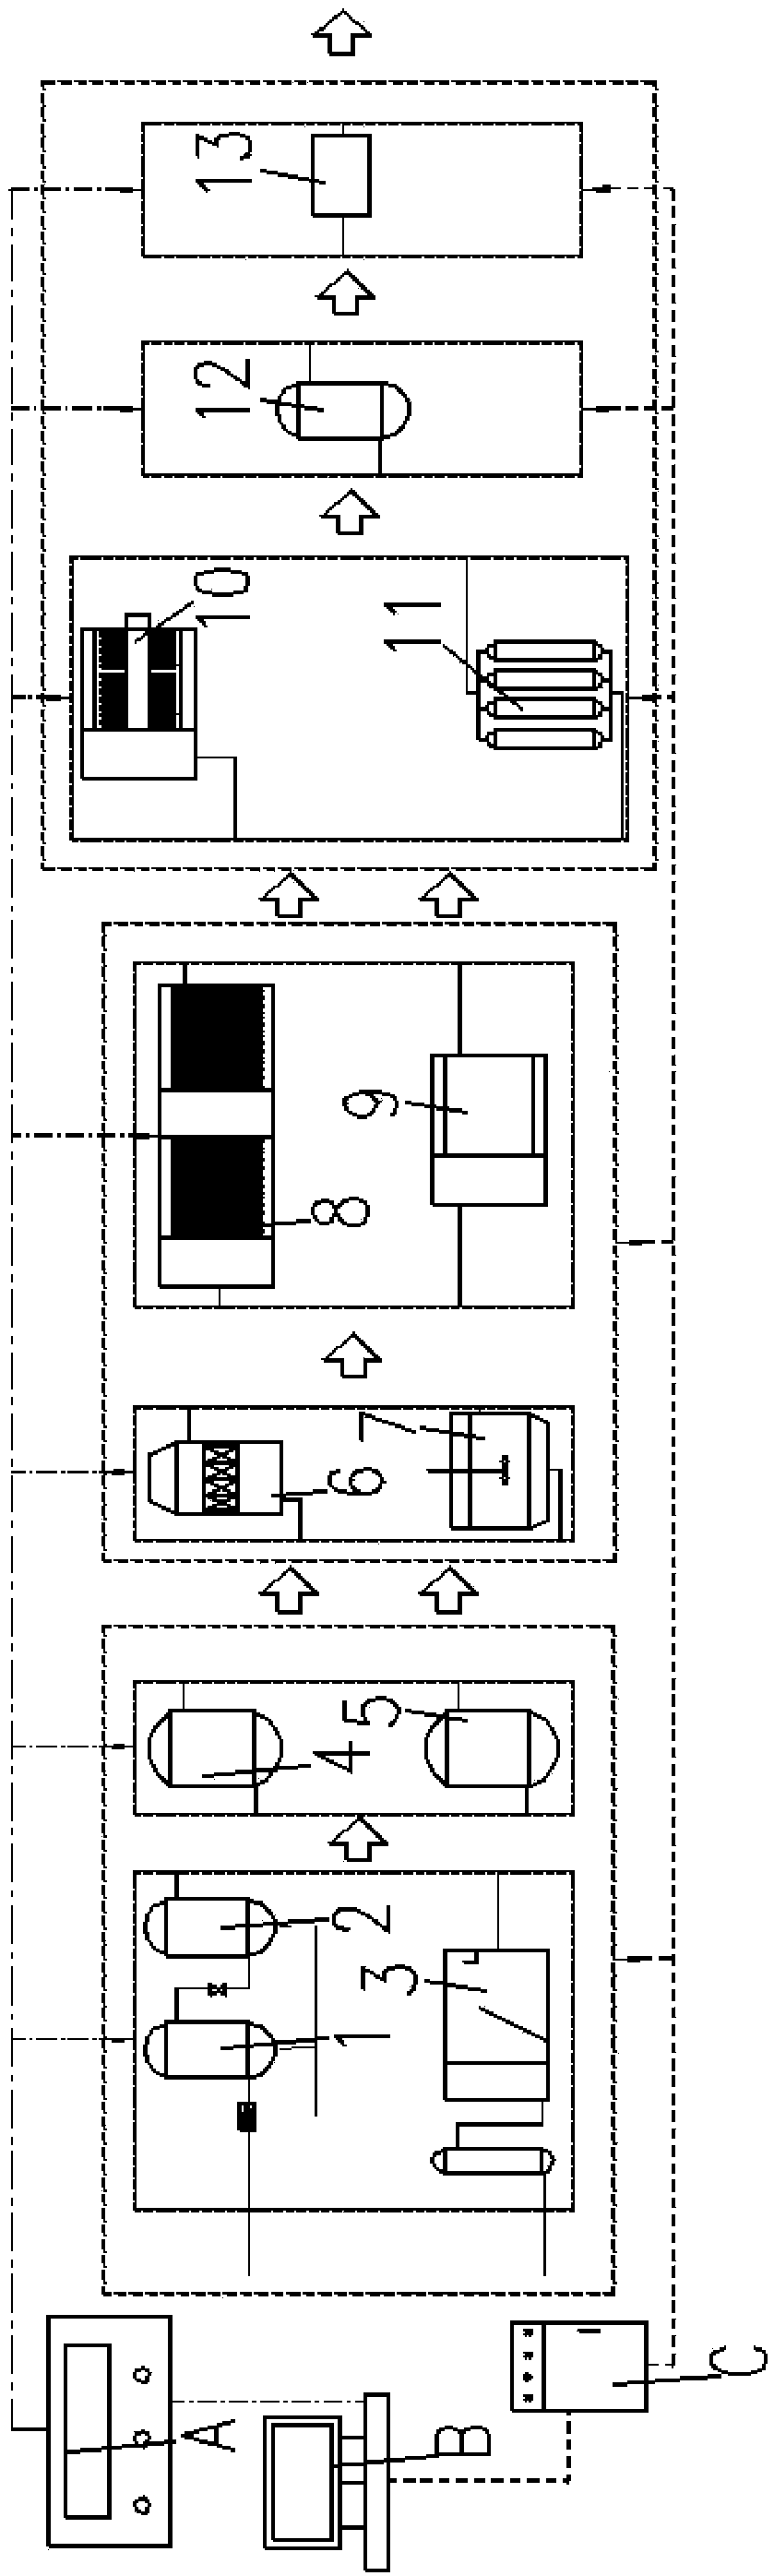 A modular integrated process method for kitchen waste filtrate